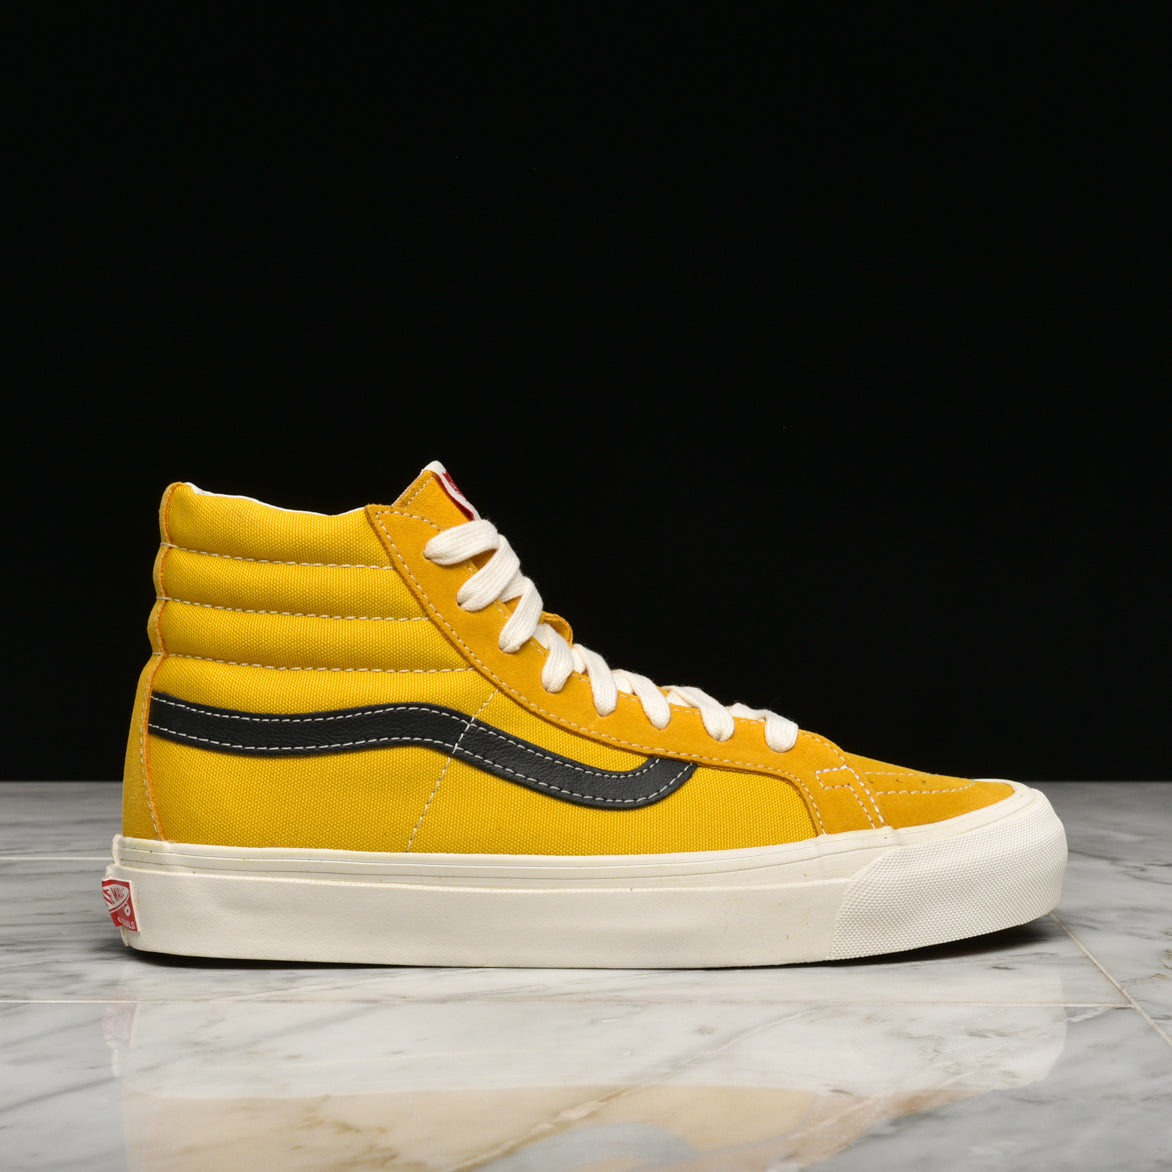 yellow and black high top vans